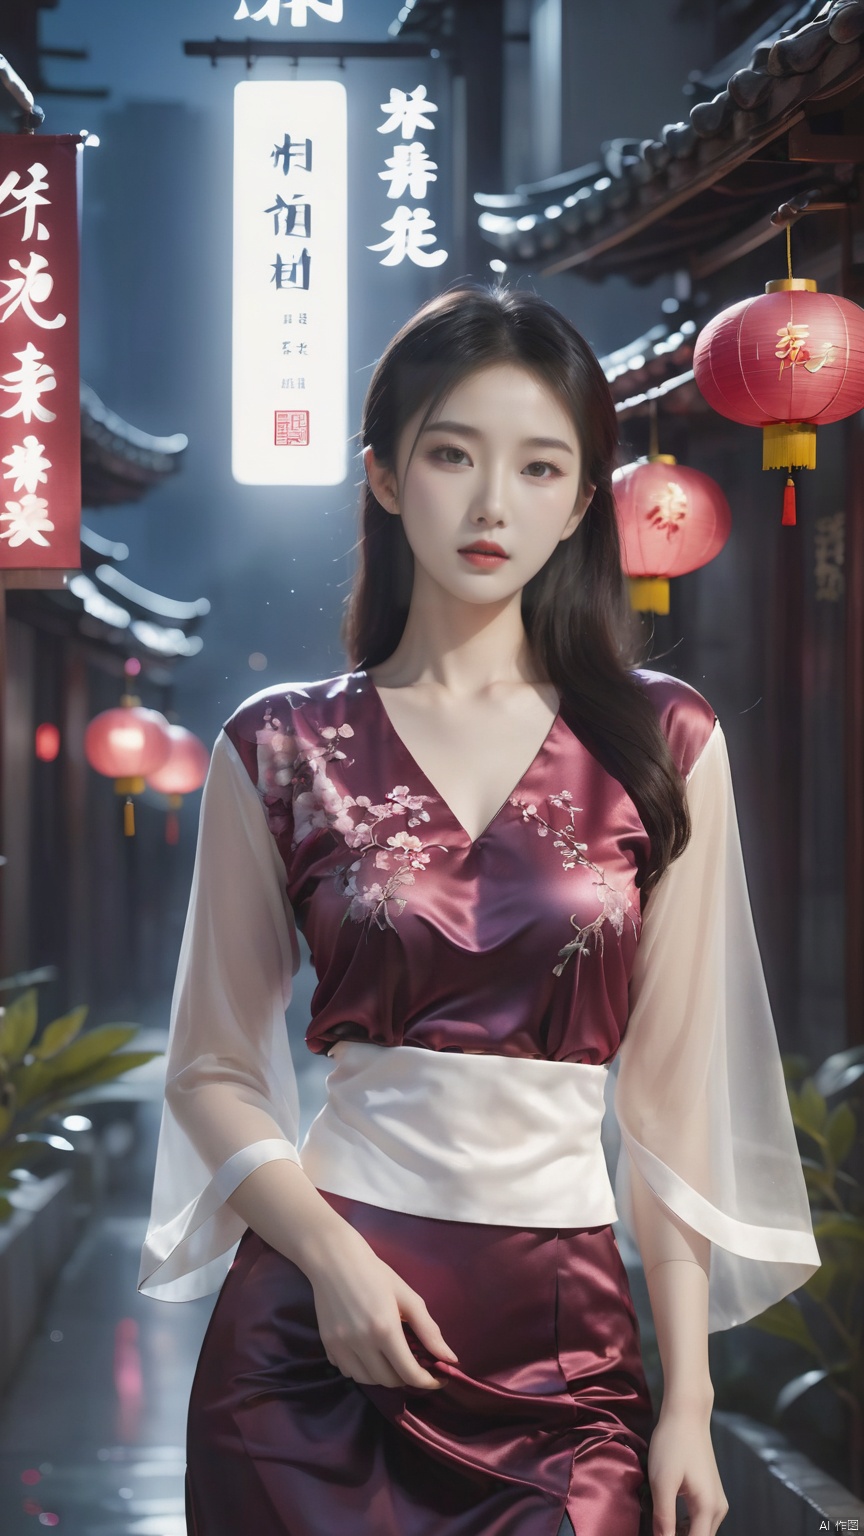 Translucent embroidery, top light, back light, cityscape, night, dark, red plum, Chinese text. , glossy transparent material style, abstract design, ethereal phantom, lifelike, black and white tones, shenhua, Bloom_The girl in the flower